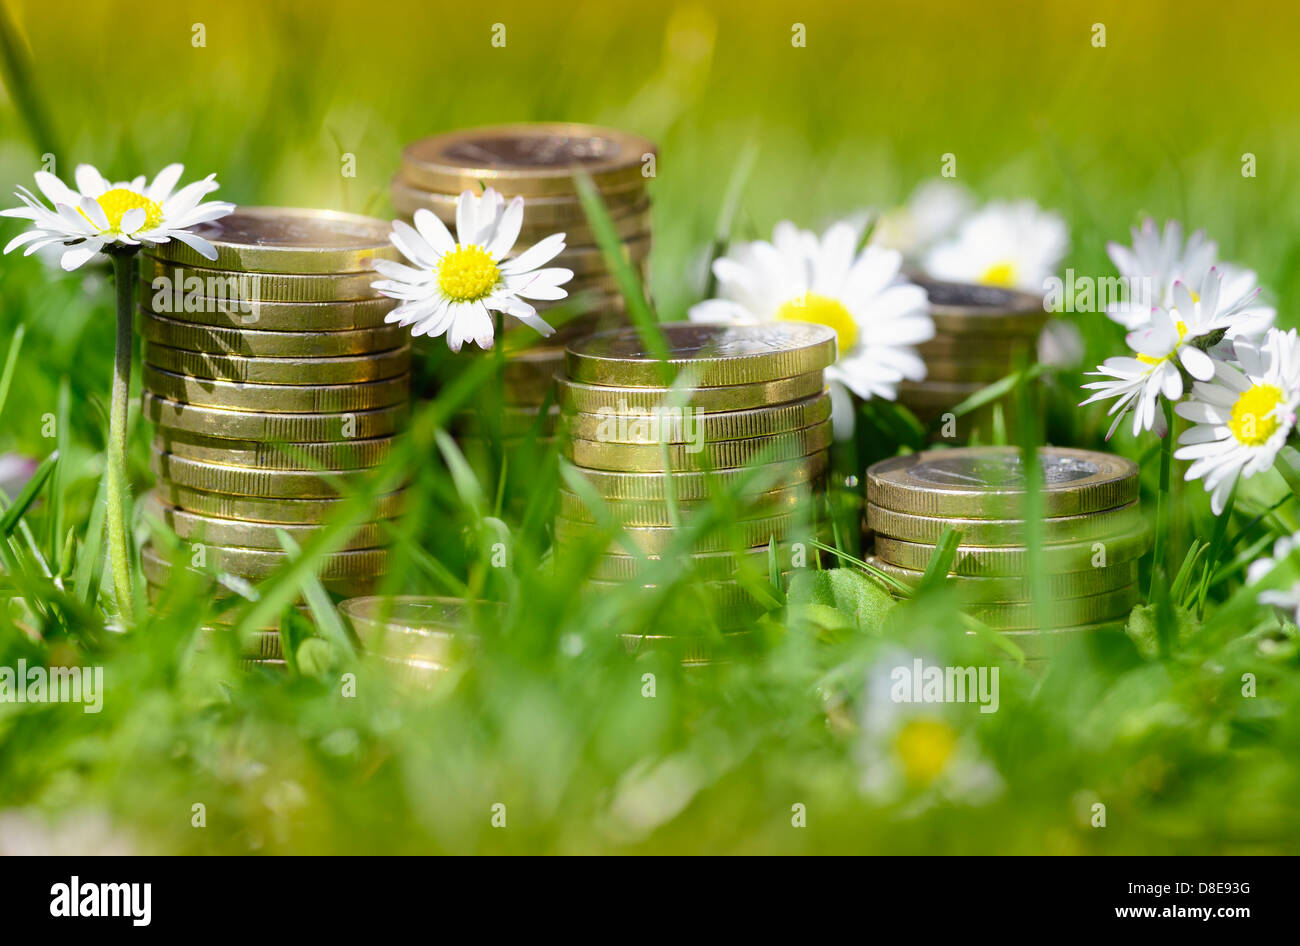 Piles of coins in the grass, investment Stock Photo